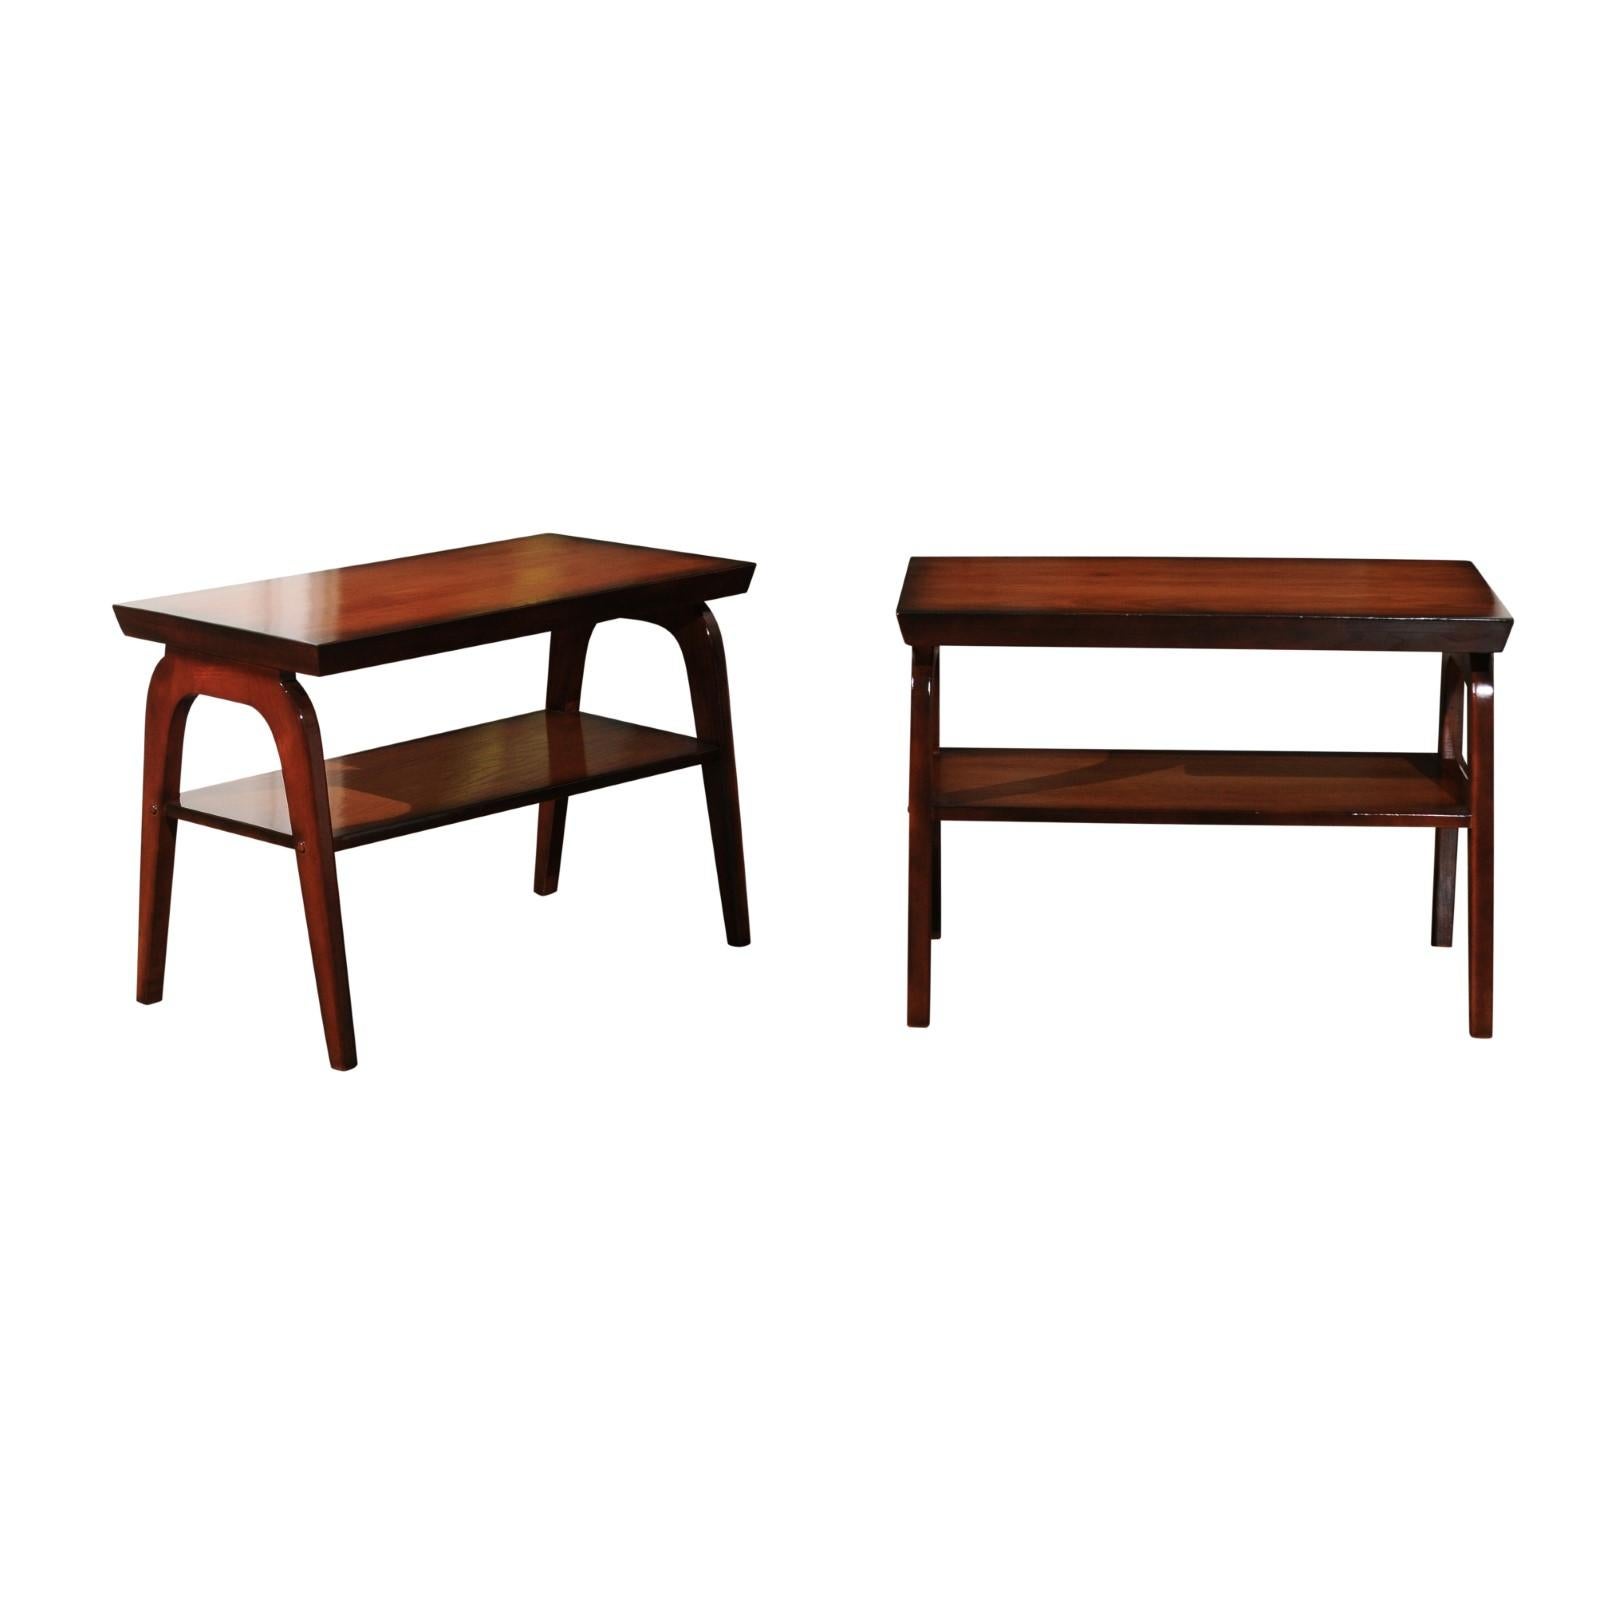 Rare Restored Pair of End Tables by John Wisner for Ficks Reed, circa 1954